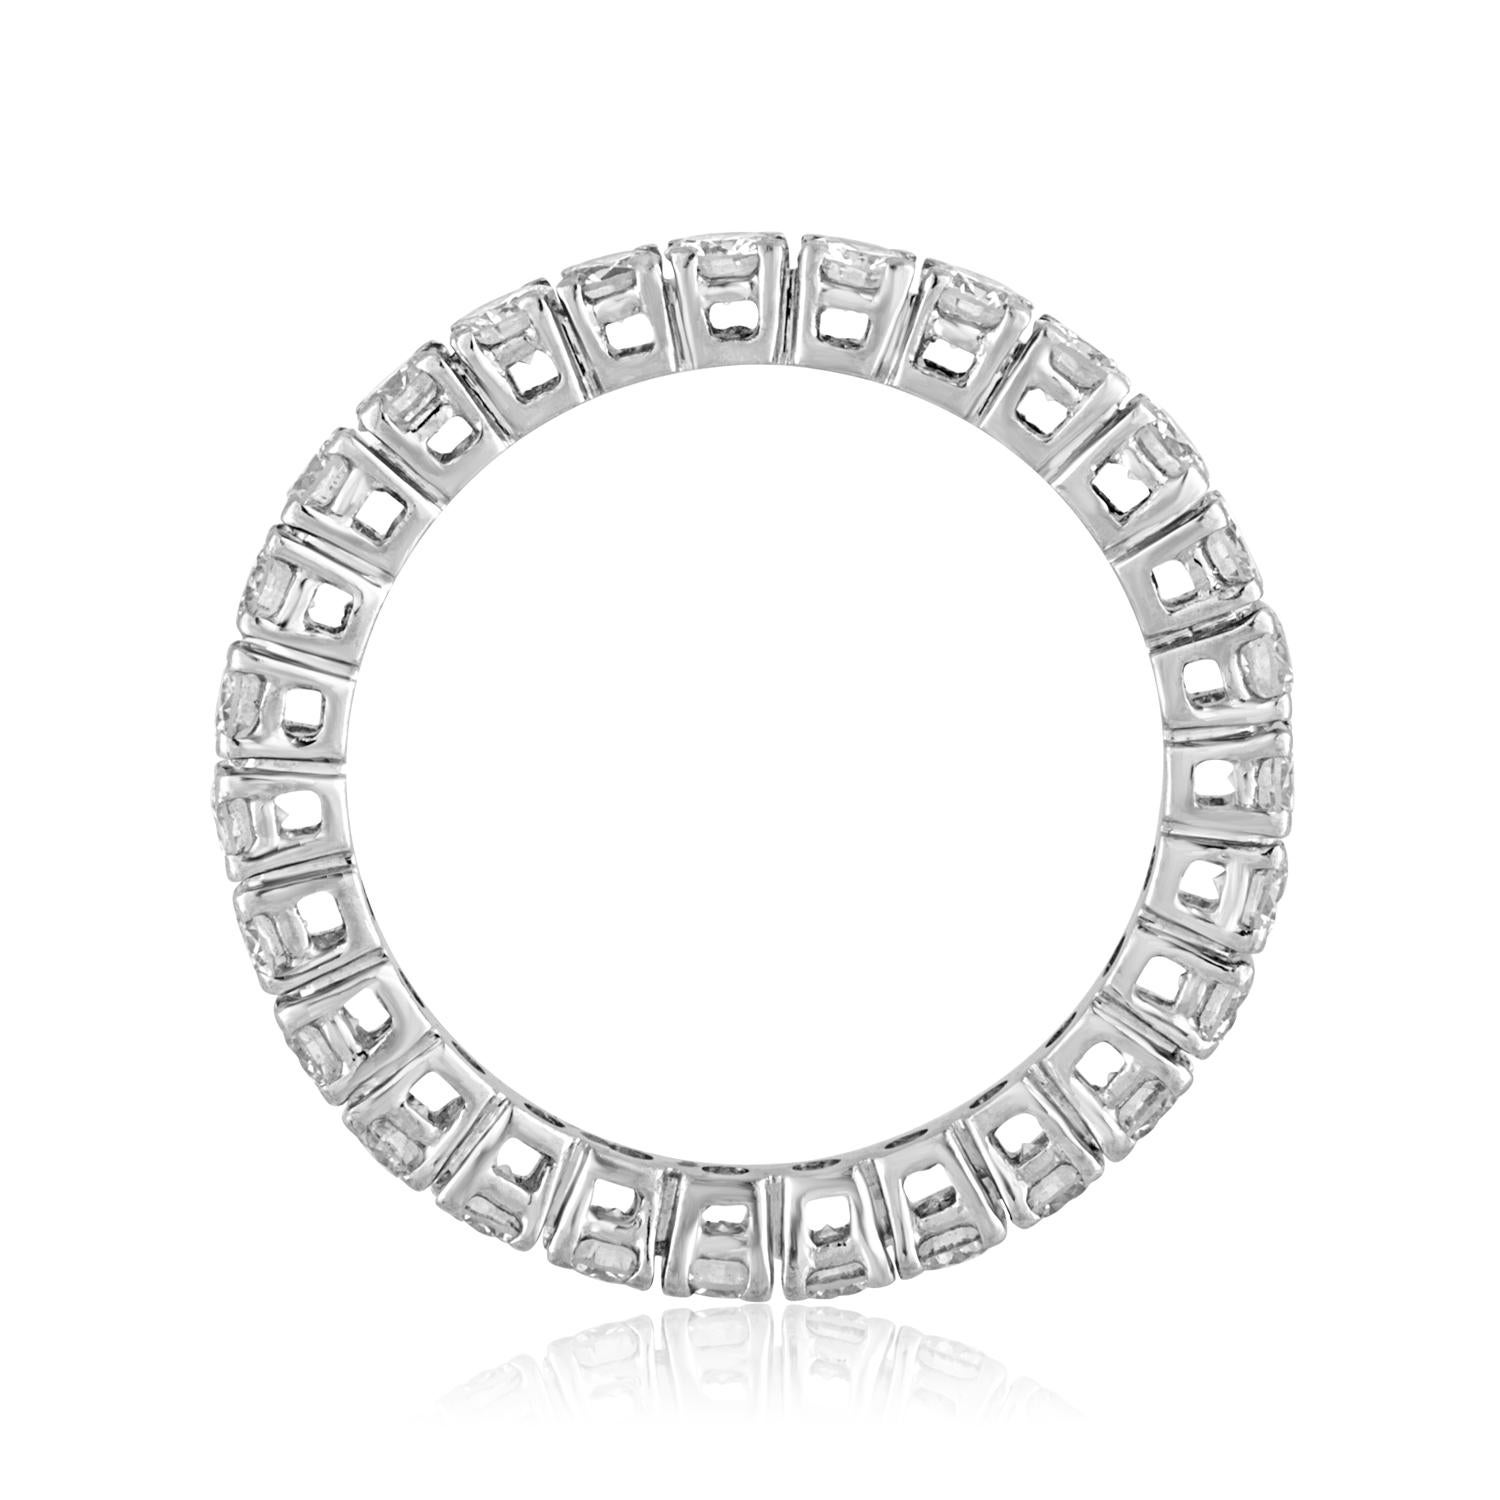 Round Brilliant Diamond Eternity Band
The Ring is 14K White Gold
There is 1.50 Carat in Diamonds G VS
The ring is a Size 7.25 NOT SIZABLE
The ring weighs 2.7 grams